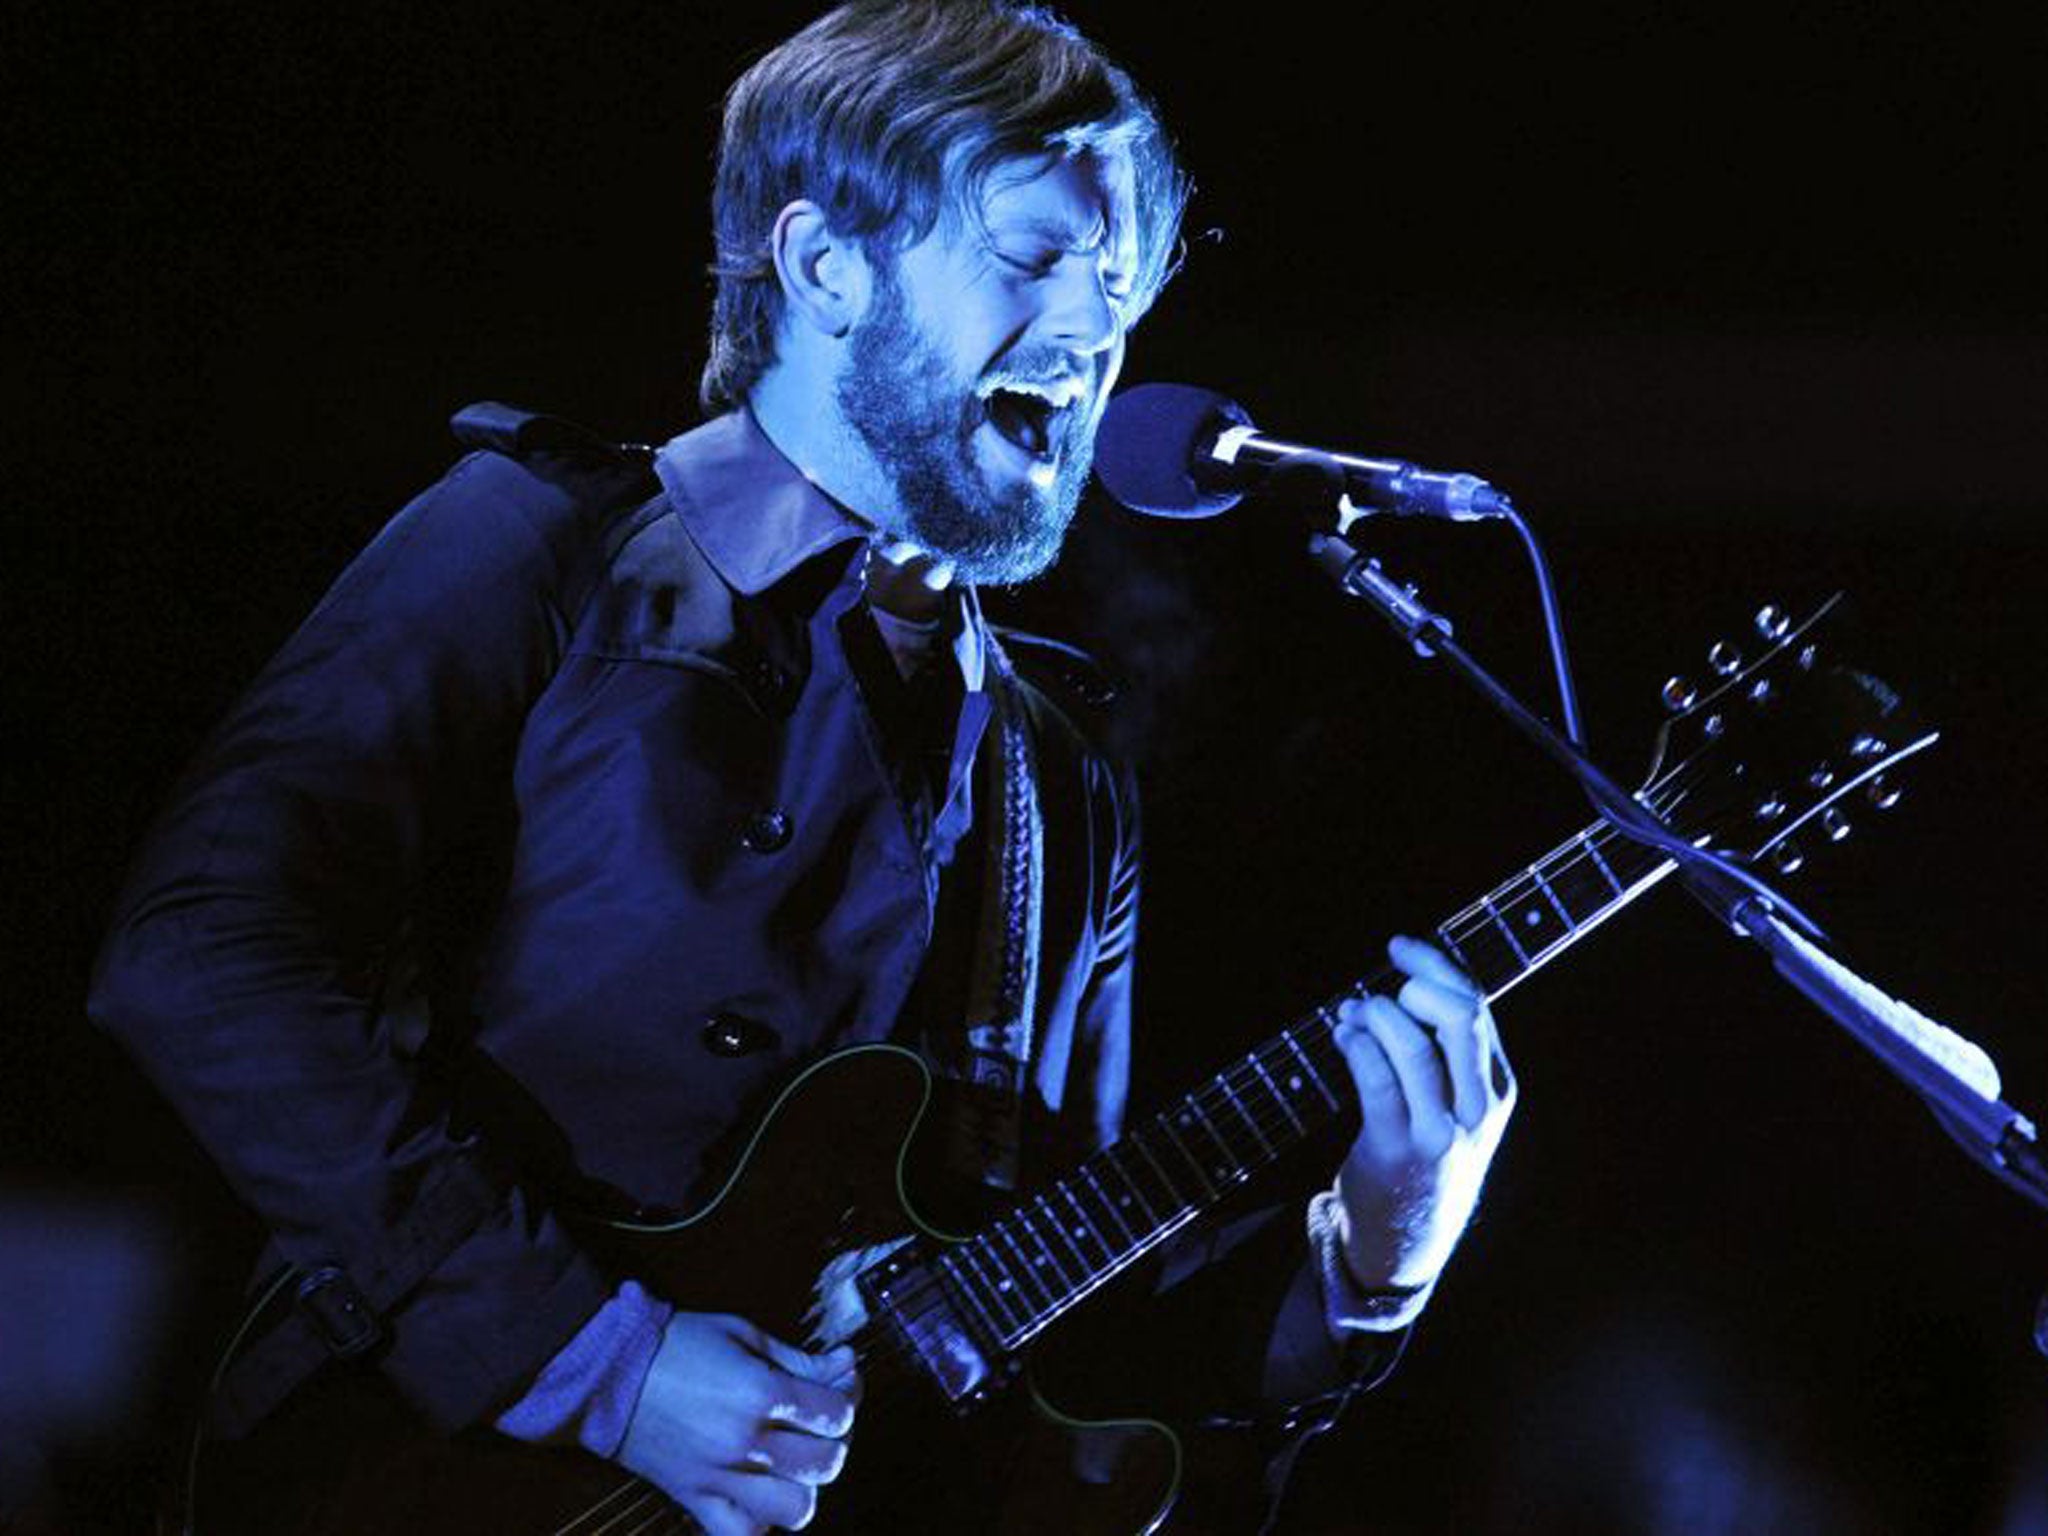 US singer Caleb Followill of the band Kings of Leon performs live